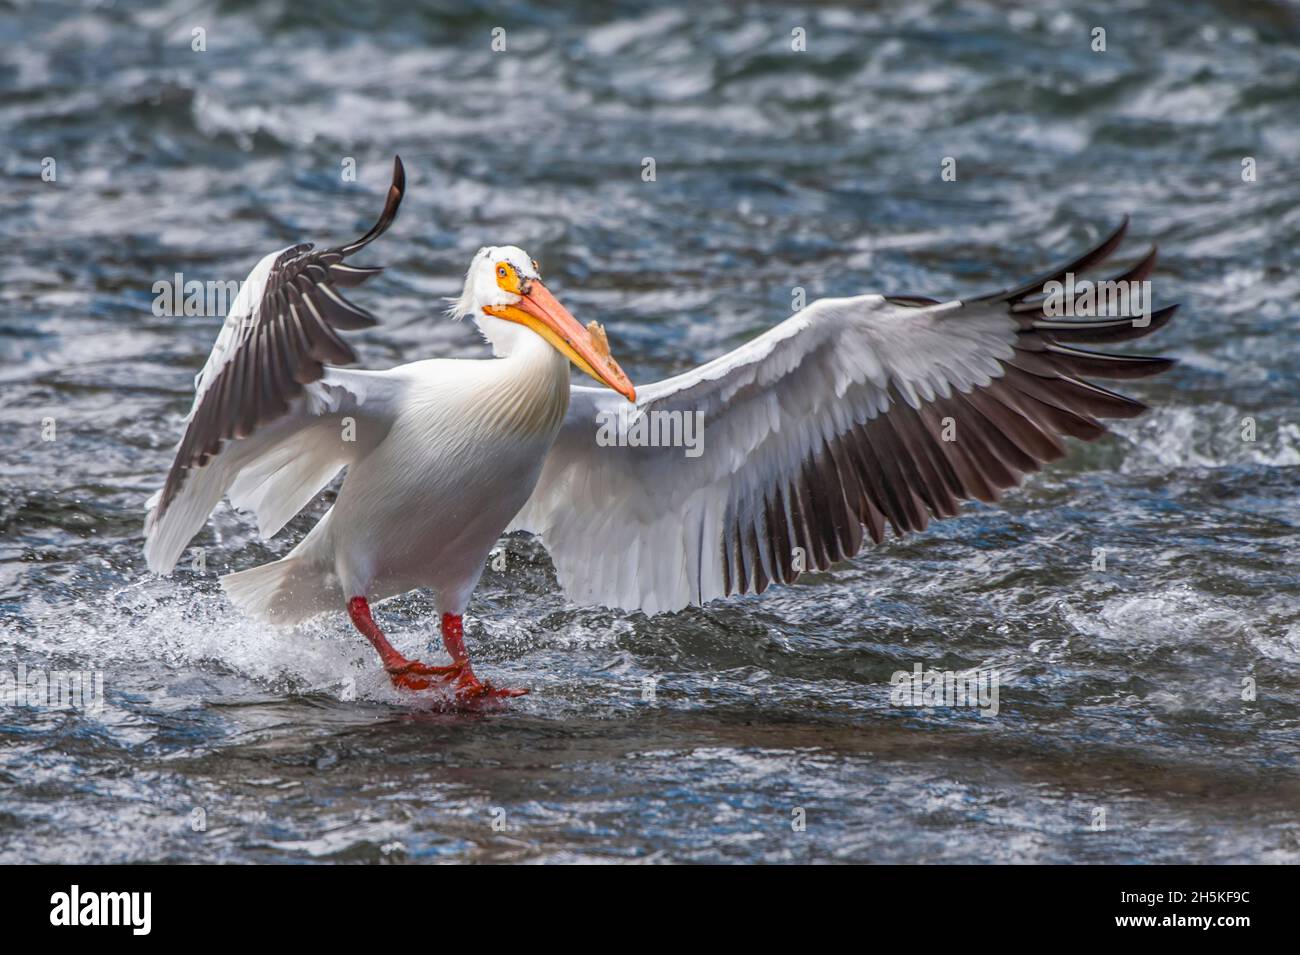 Portrait of an American white pelican (Pelecanus erythrorhynchos) with a bill horn on its beak landing in the river rapids with its wings outstretched Stock Photo